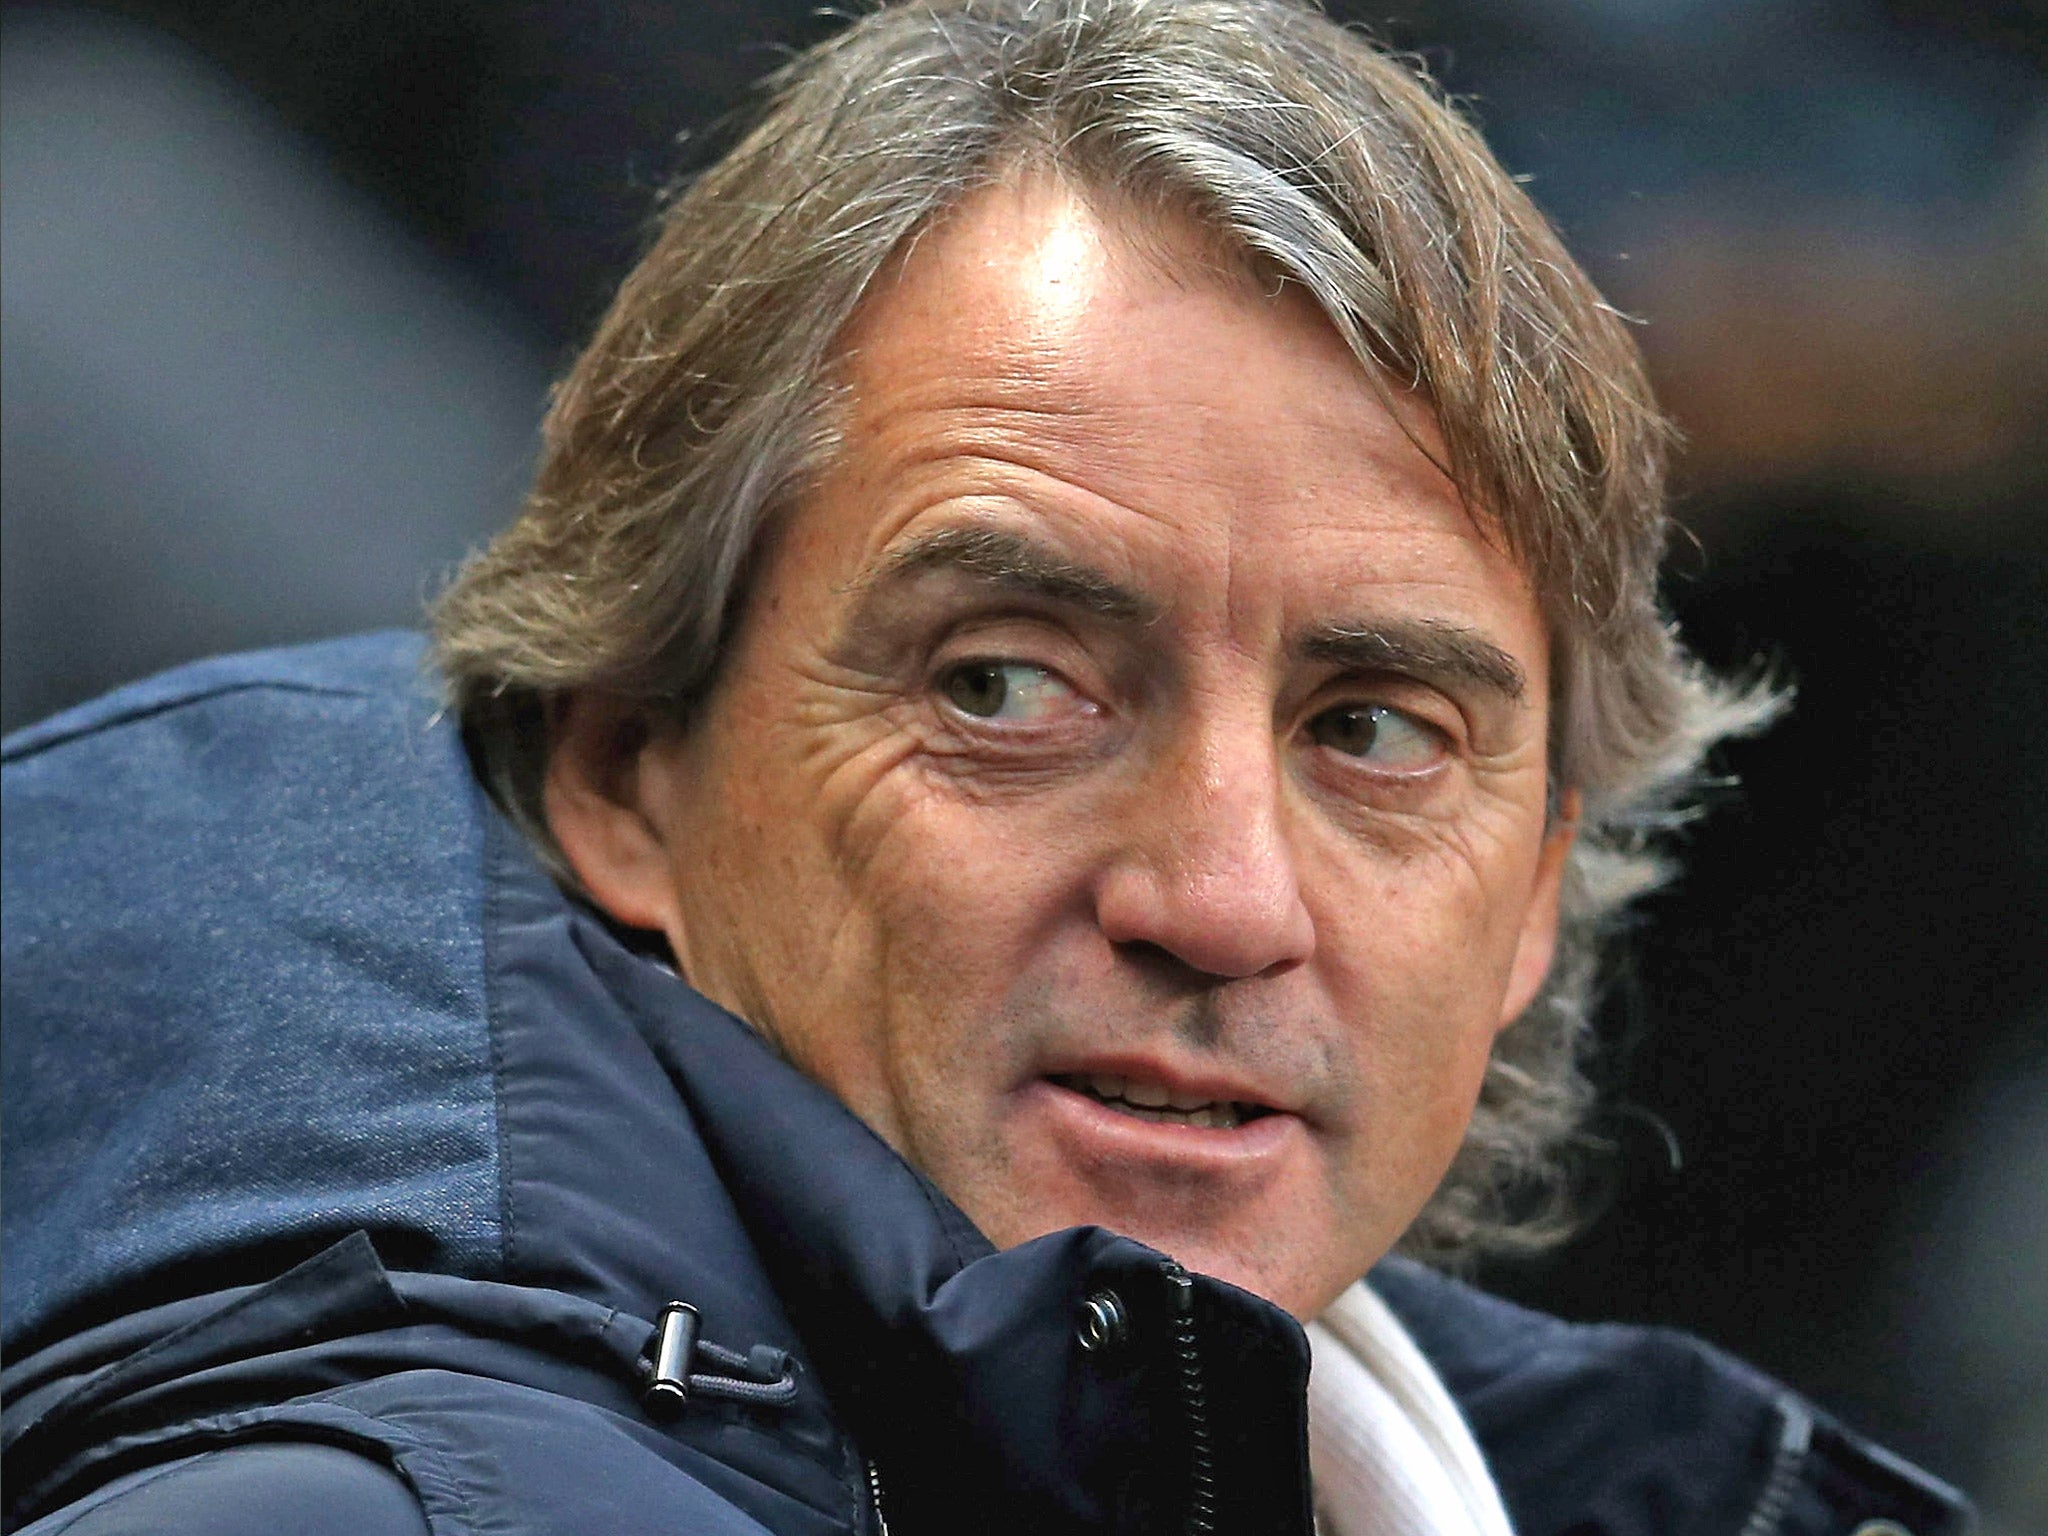 Roberto Mancini says City's FA Cup win over Leeds was 'important' after humbling at Southampton